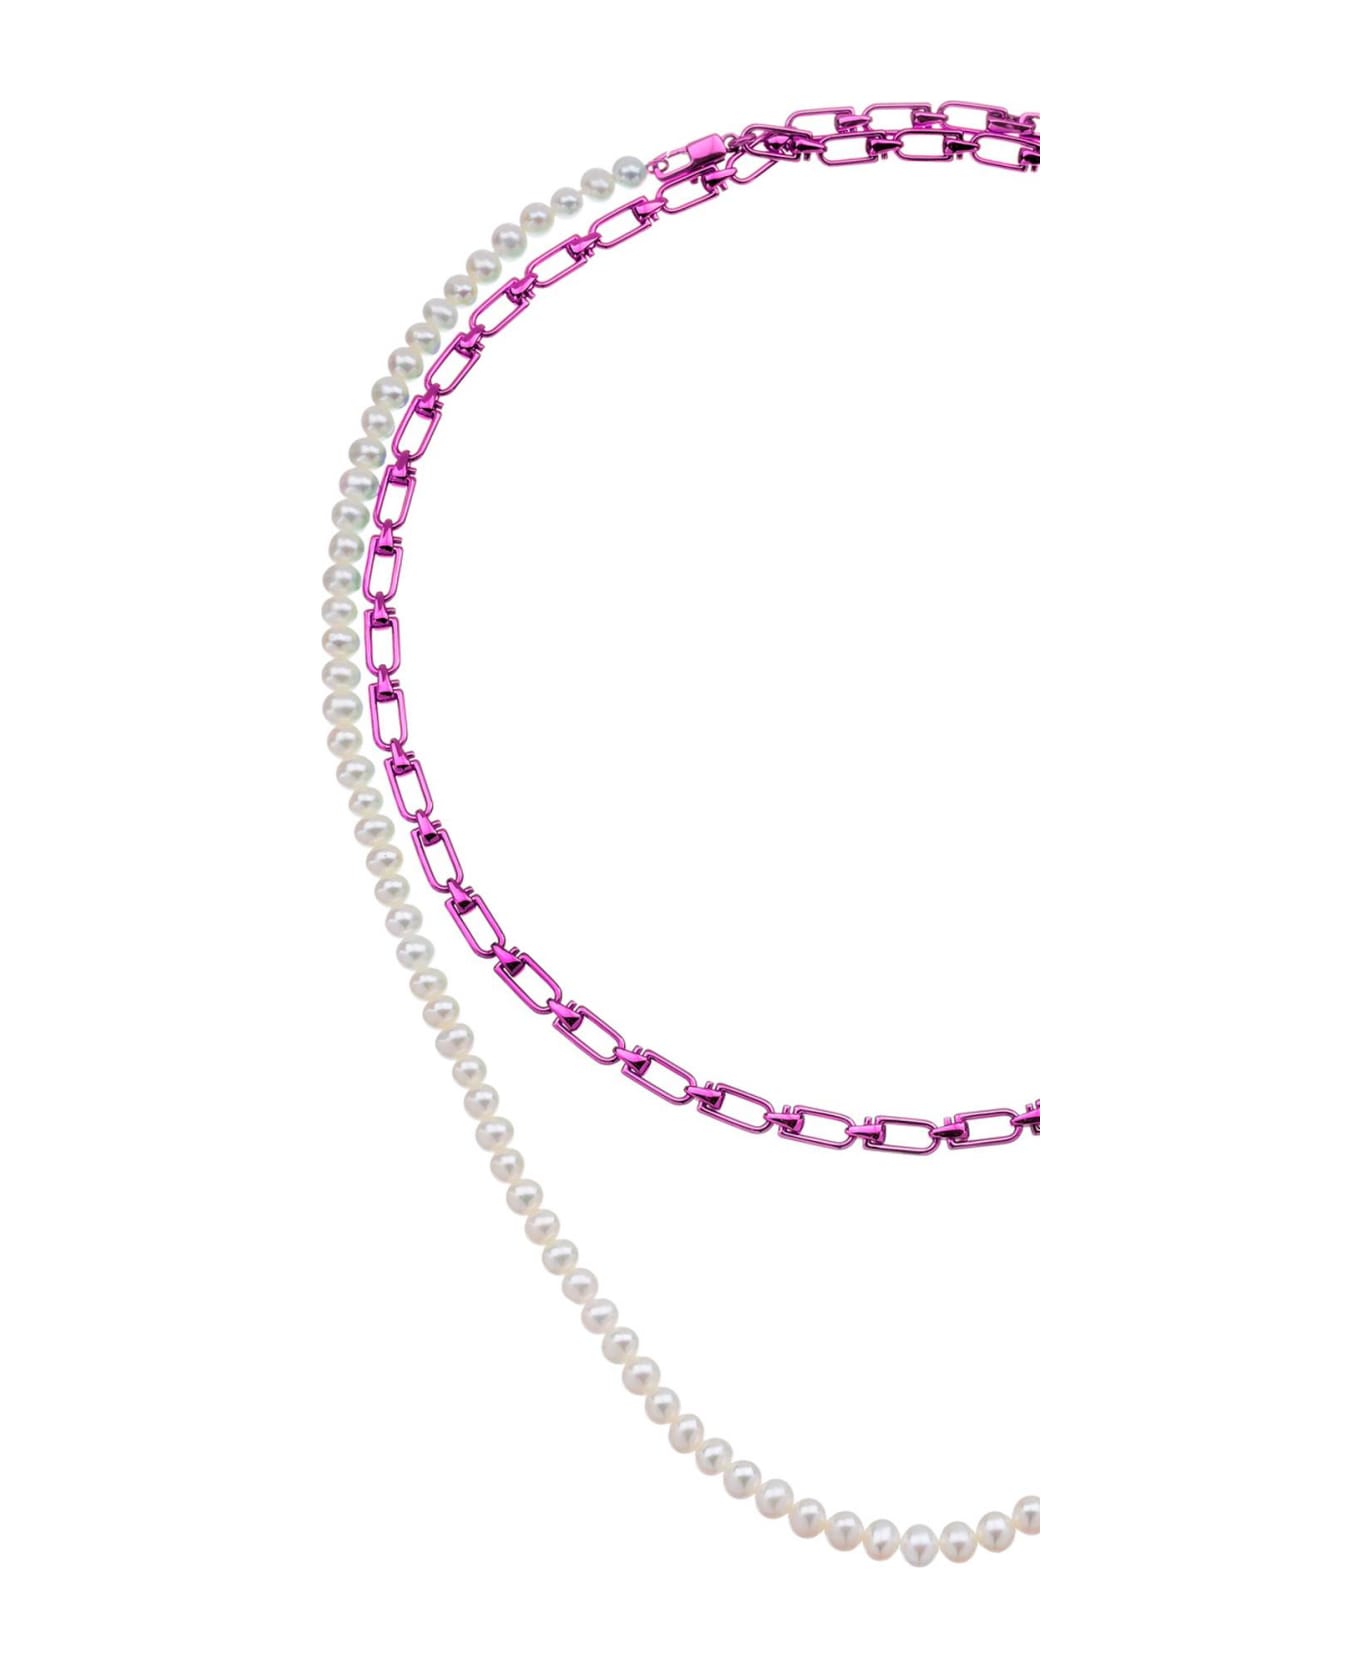 EÉRA 'reine' Double Necklace With Pearls - SILVER FUCHSIA (White) ネックレス